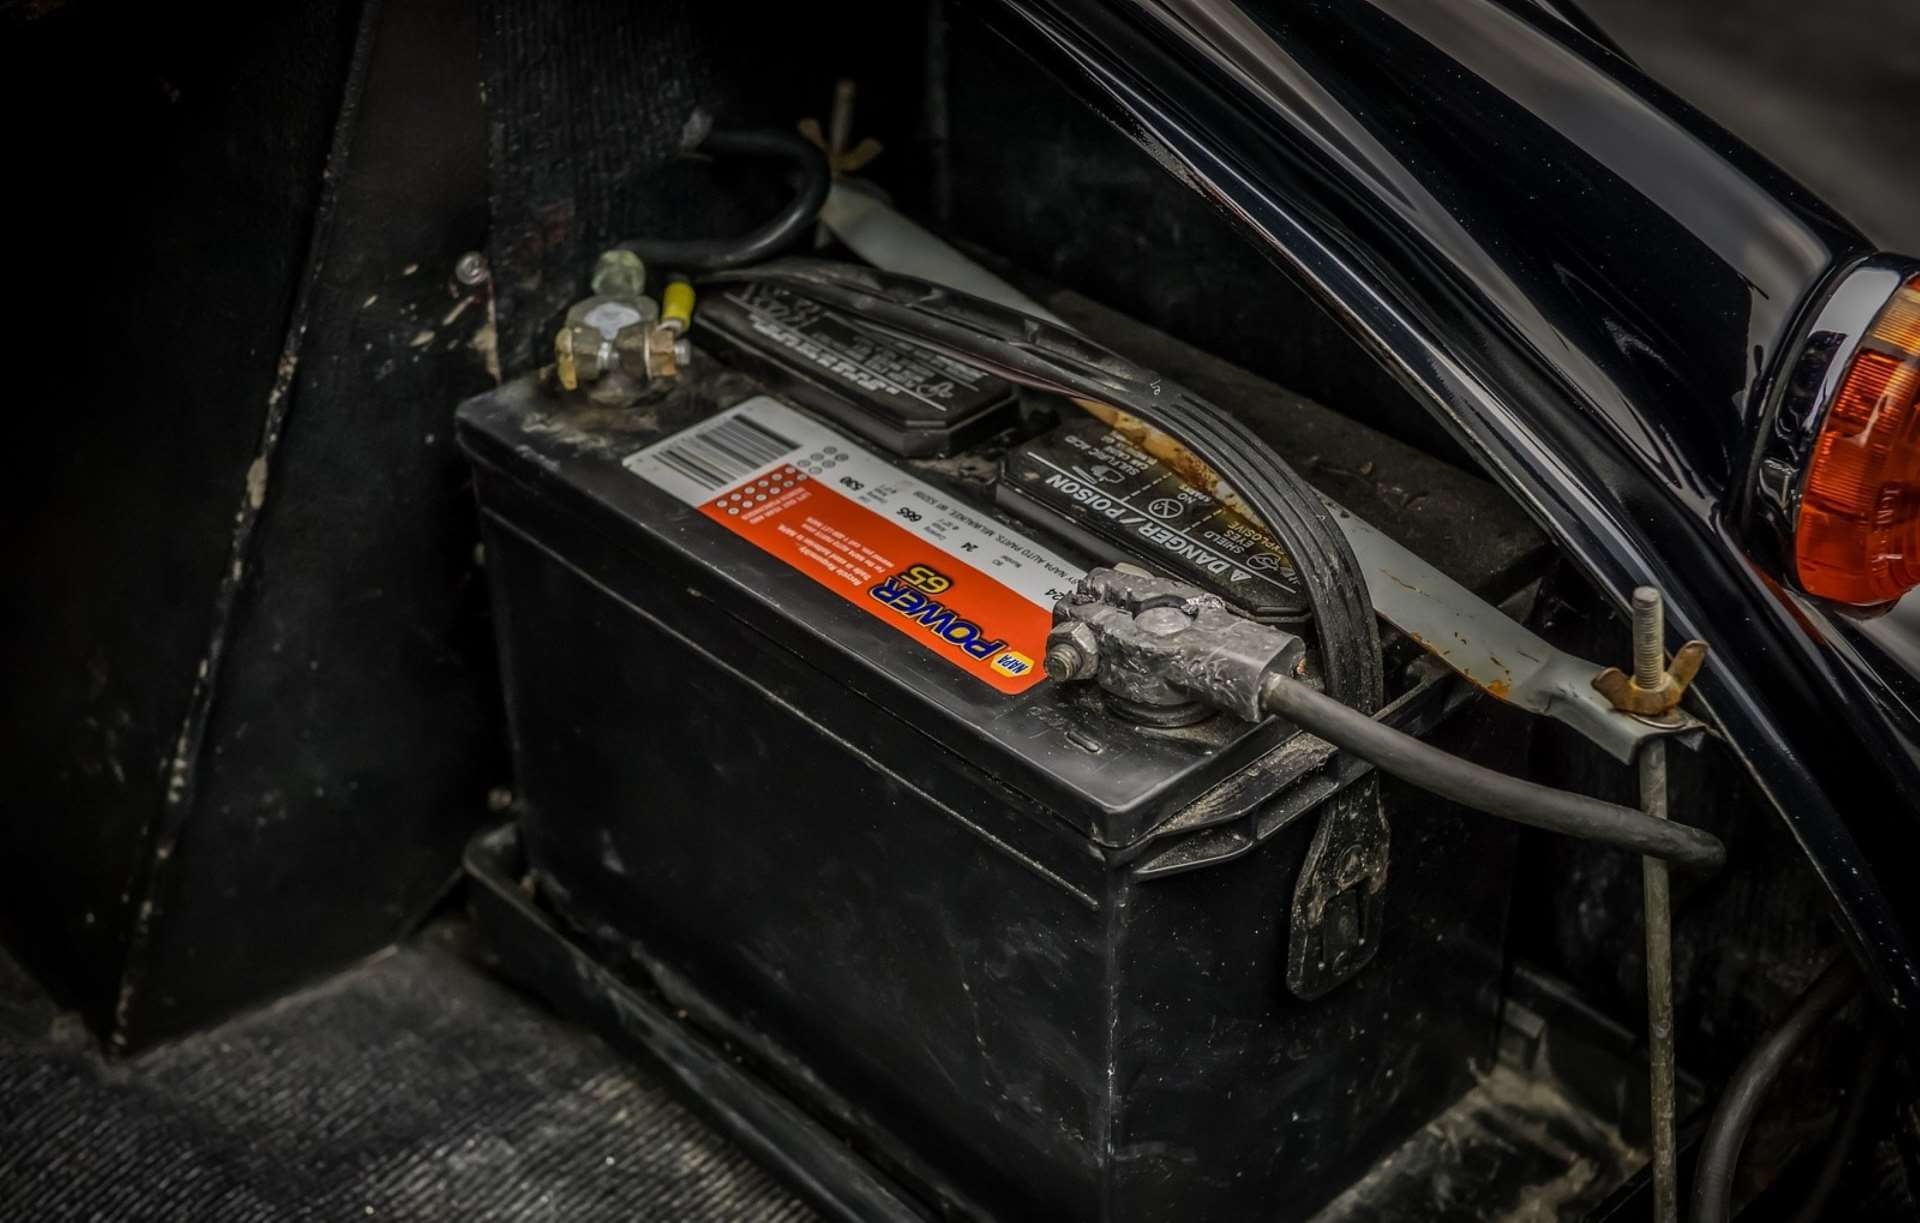 Old Napa battery in trunk of vintage car